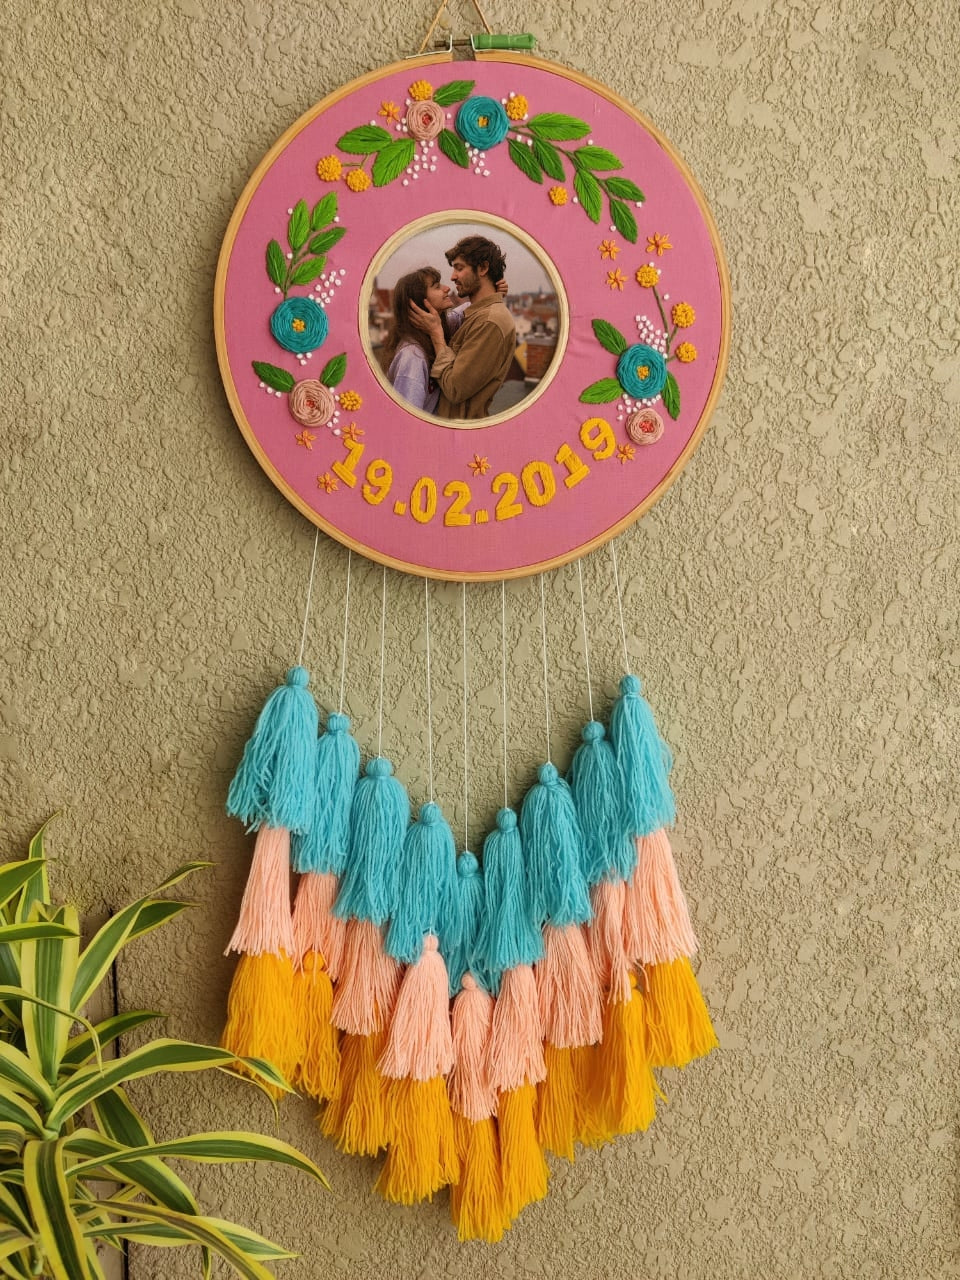 Customizable Embroidered Double Photo Hoop with Tassles